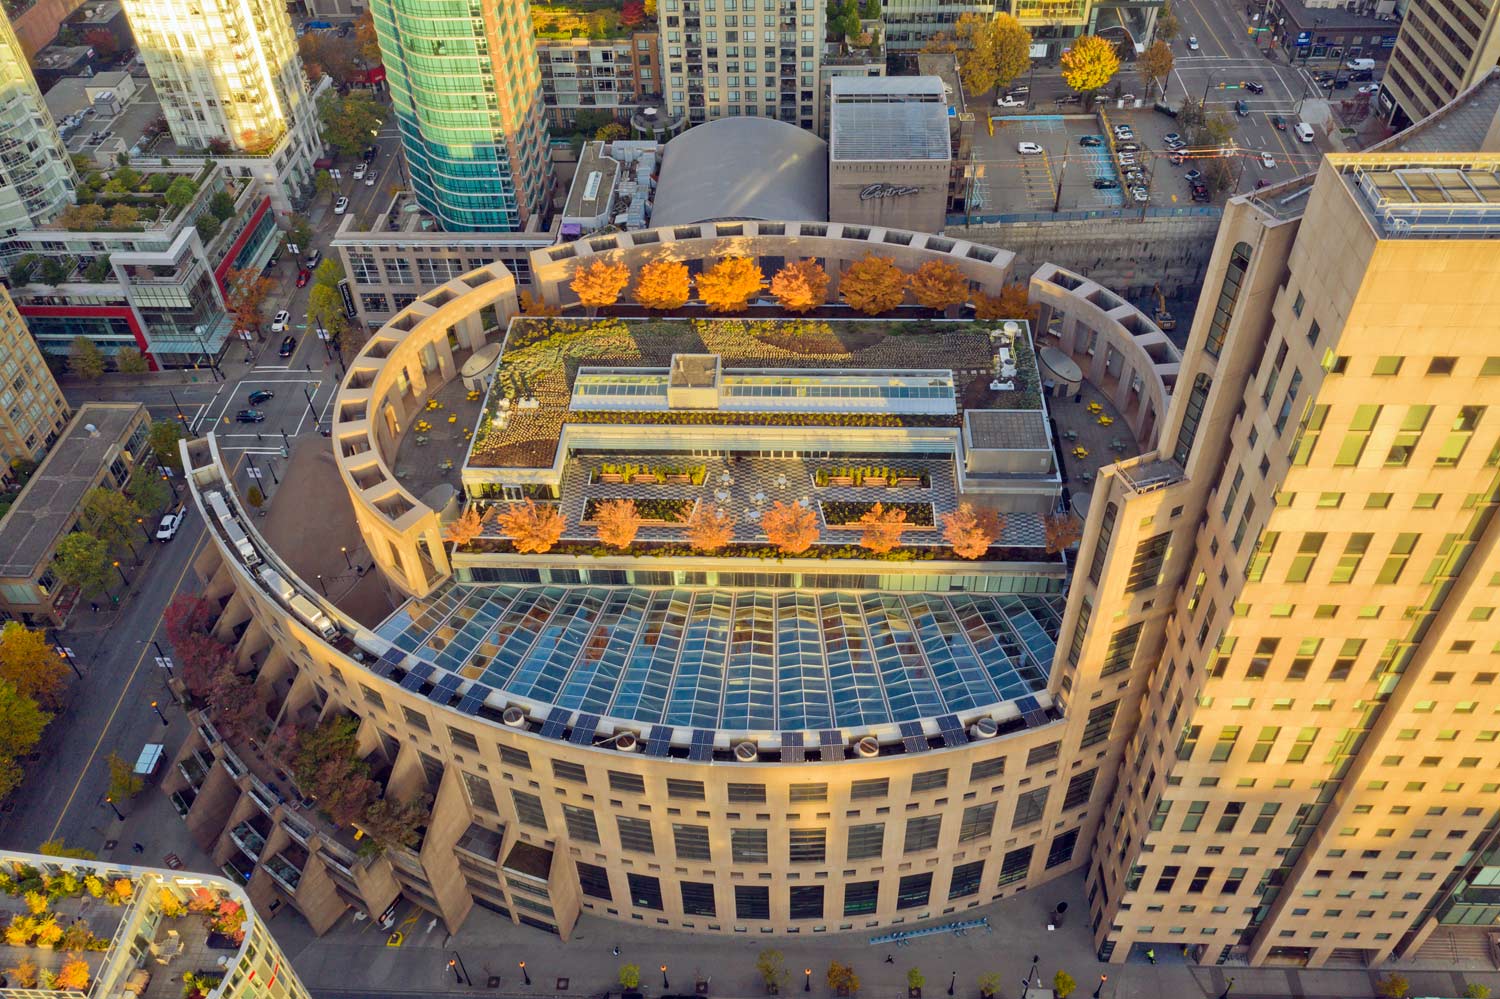 DJI_0195_1opt VANCOUVER CENTRAL LIBRARY